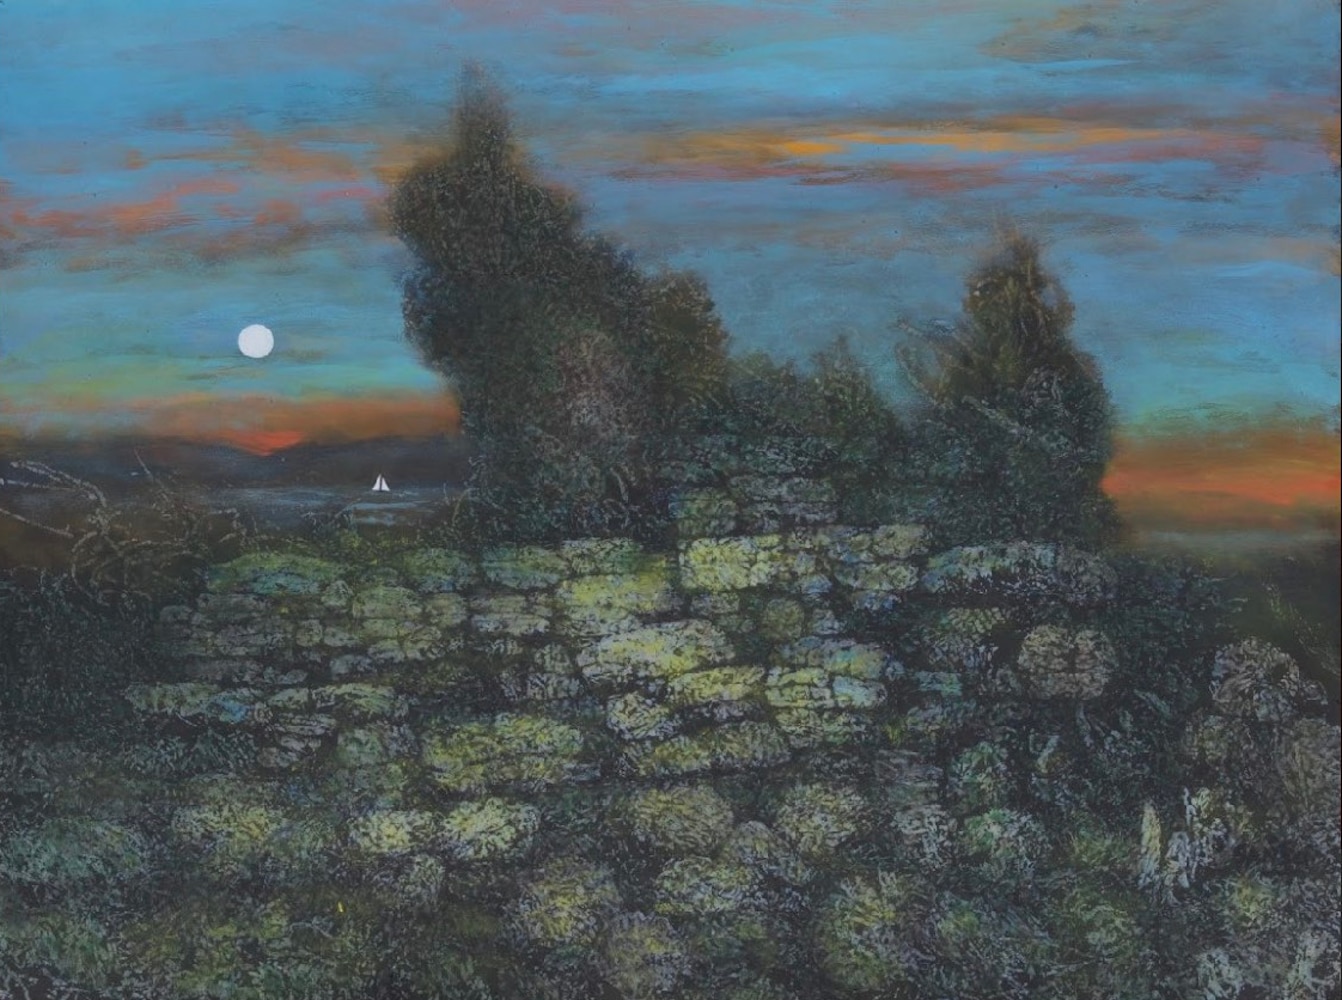 “A Moment in Lingering” by Juvenal Sansó, 1962, Tempera, Jack Teotico Collection